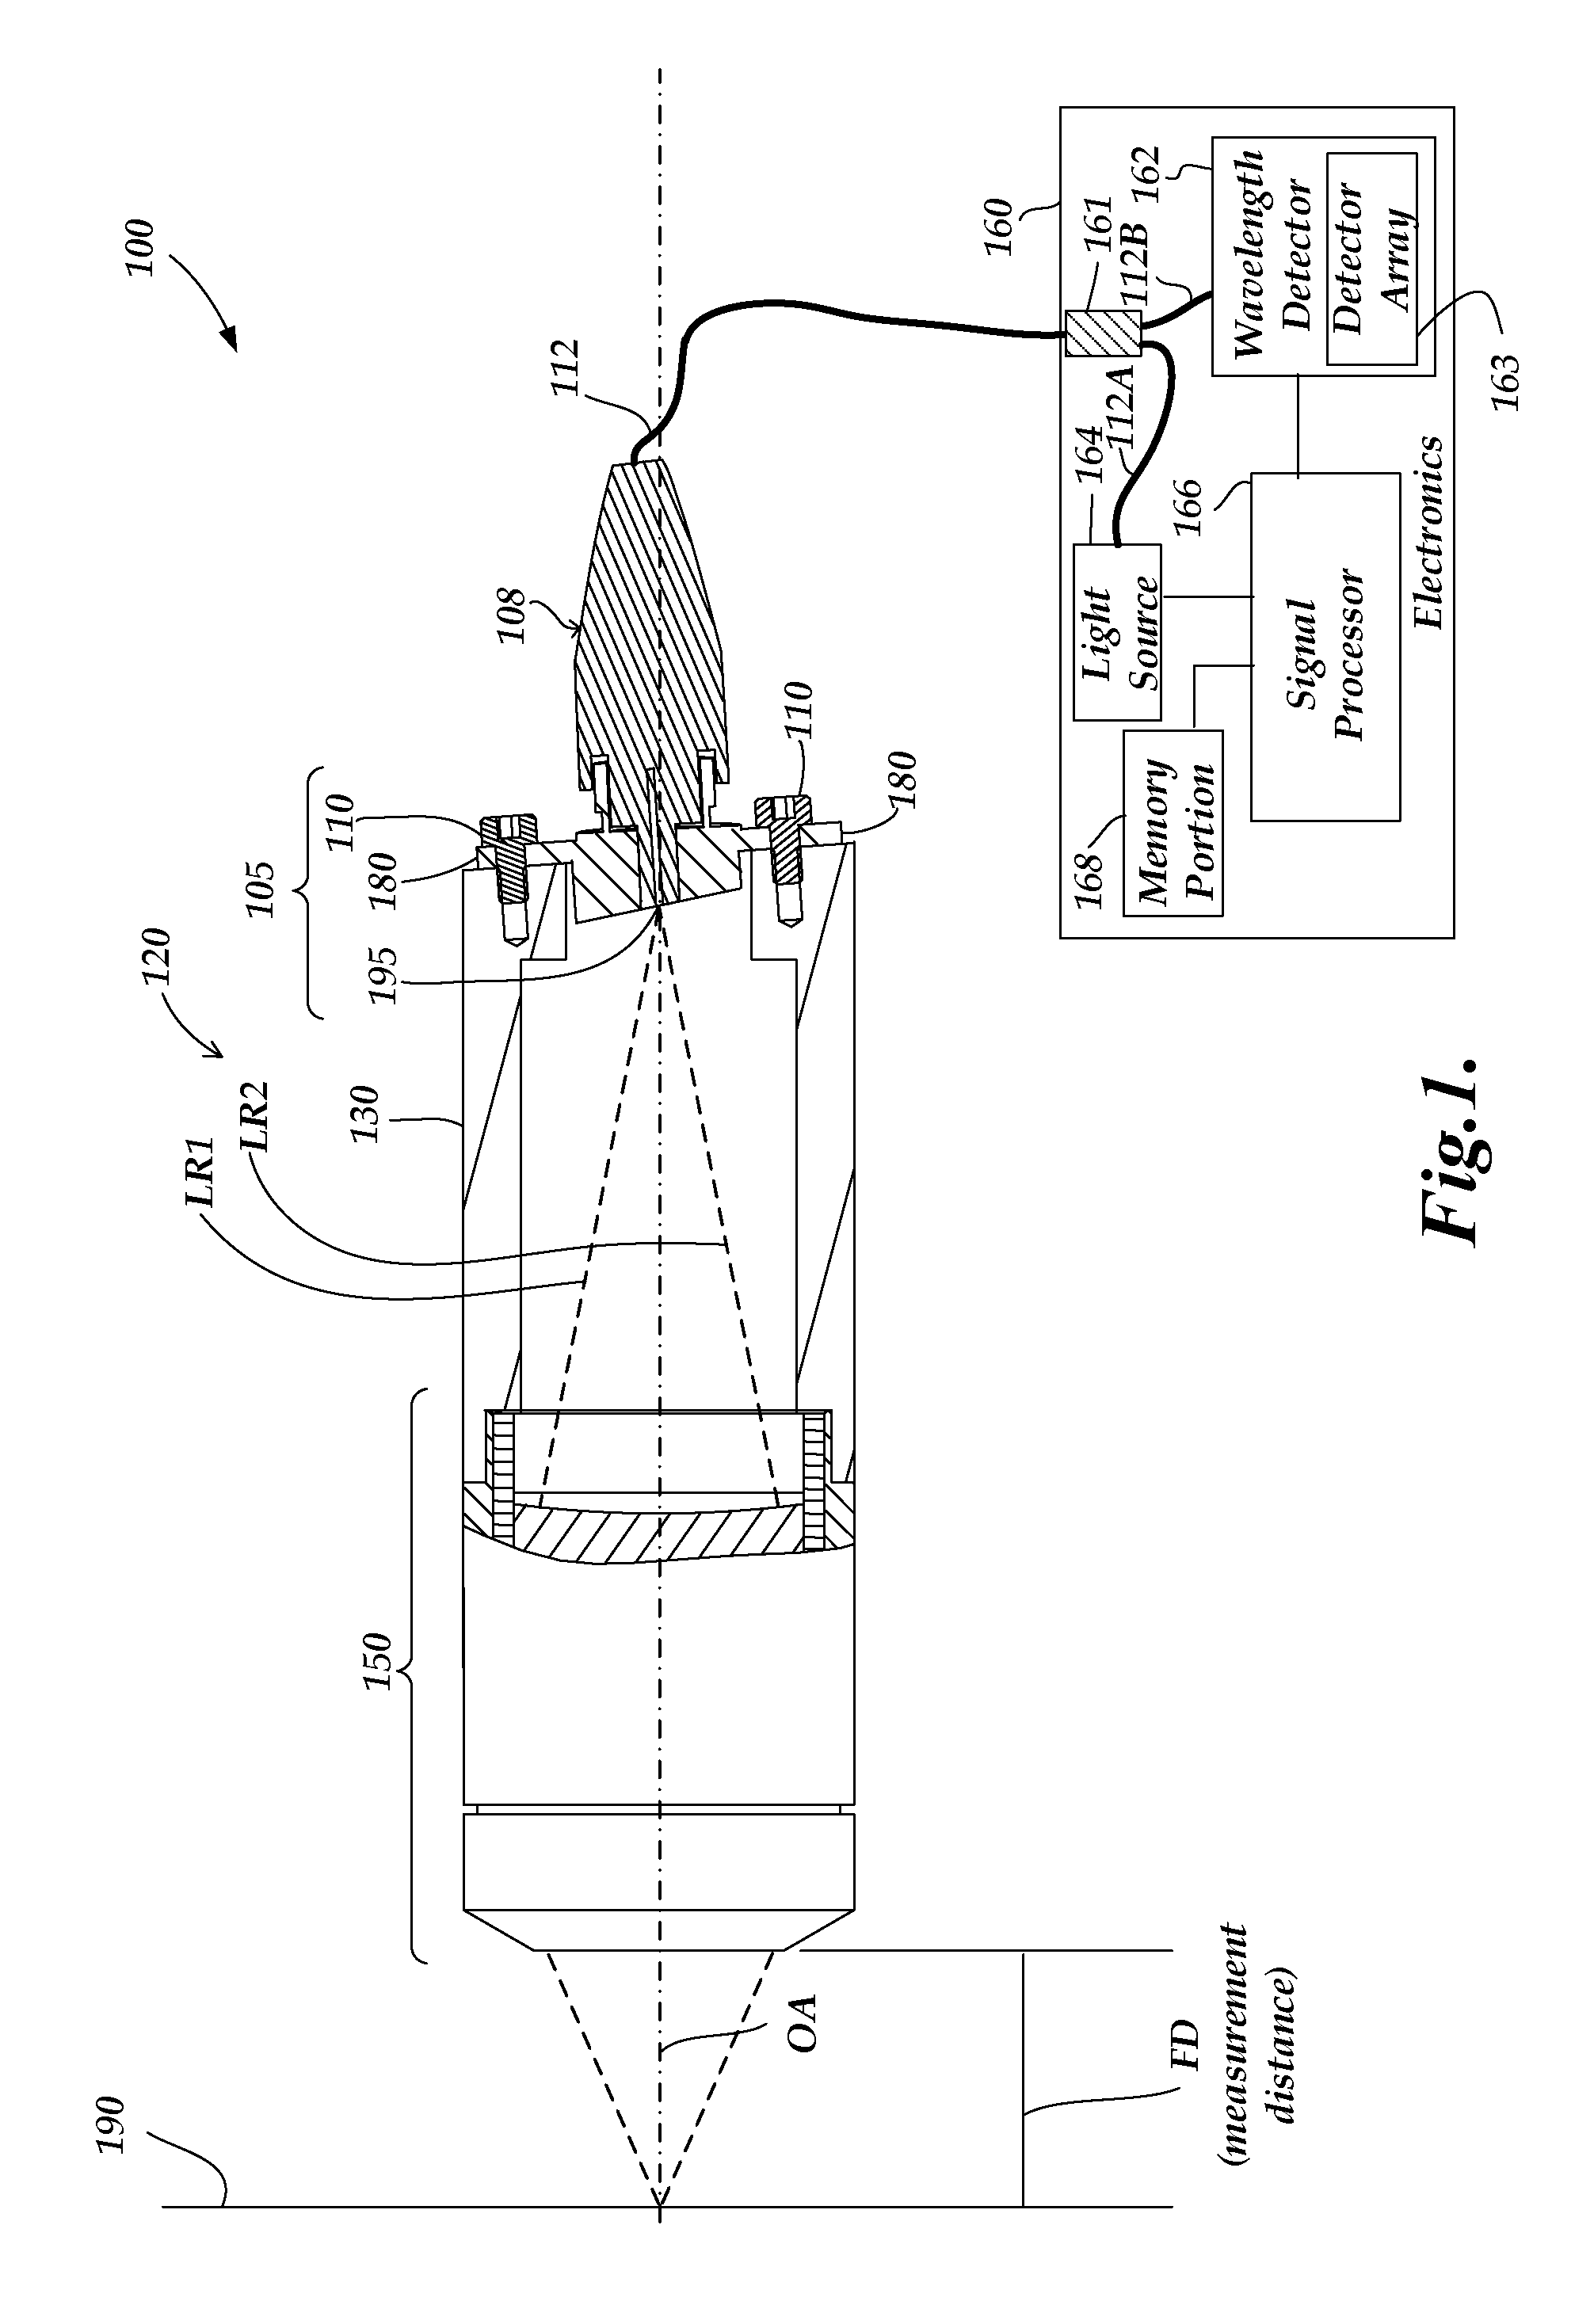 Phosphor wheel configuration for high intensity point source